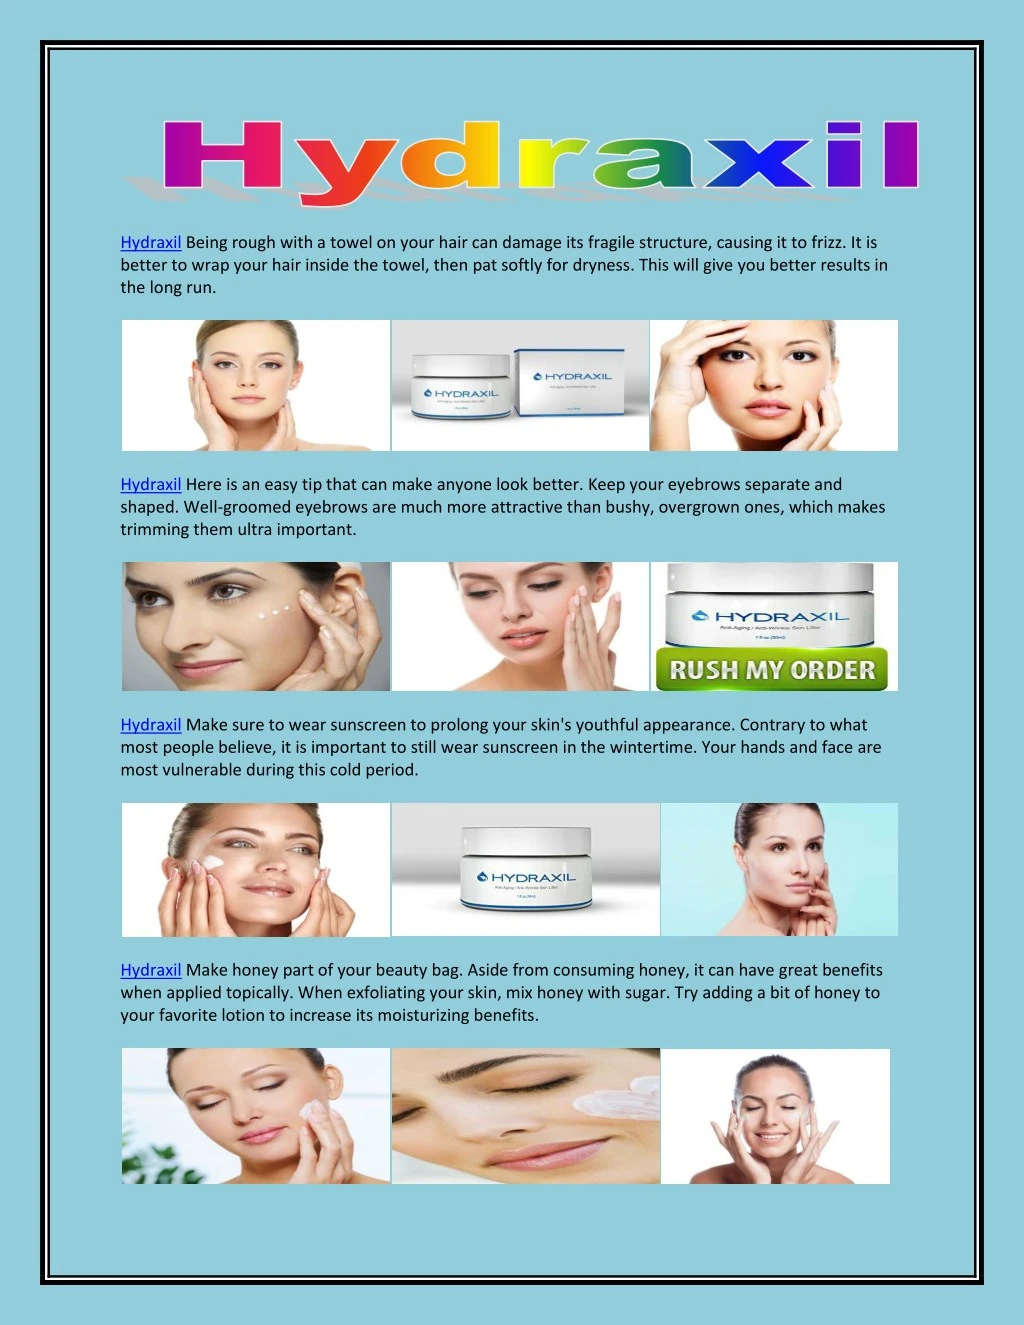 hydraxil being rough with a towel on your hair